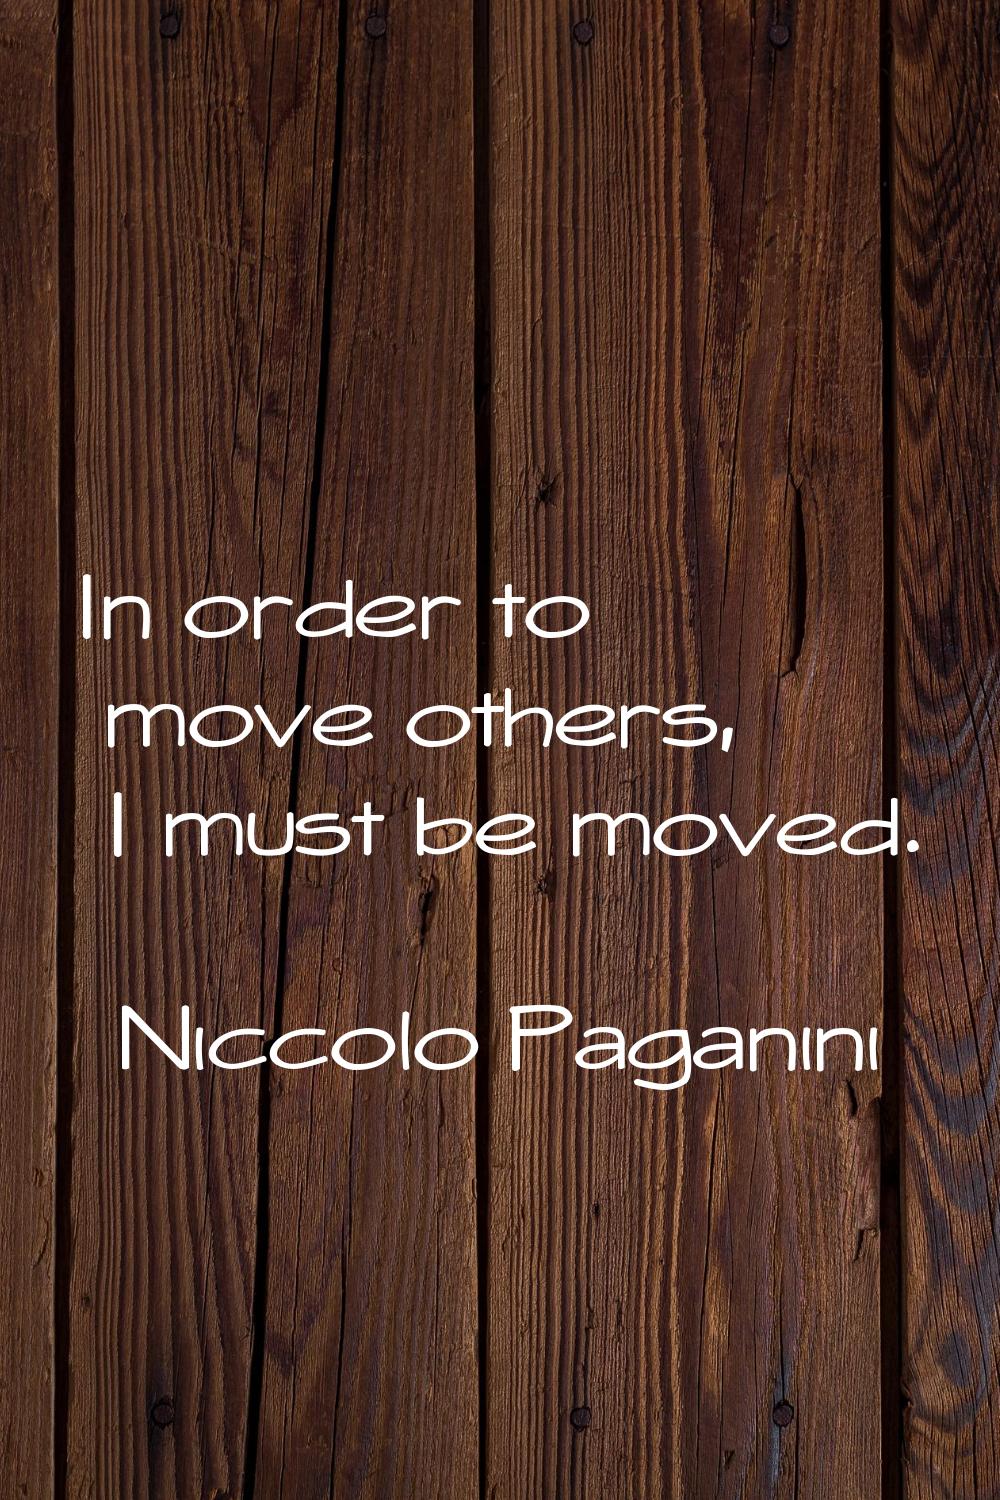 In order to move others, I must be moved.